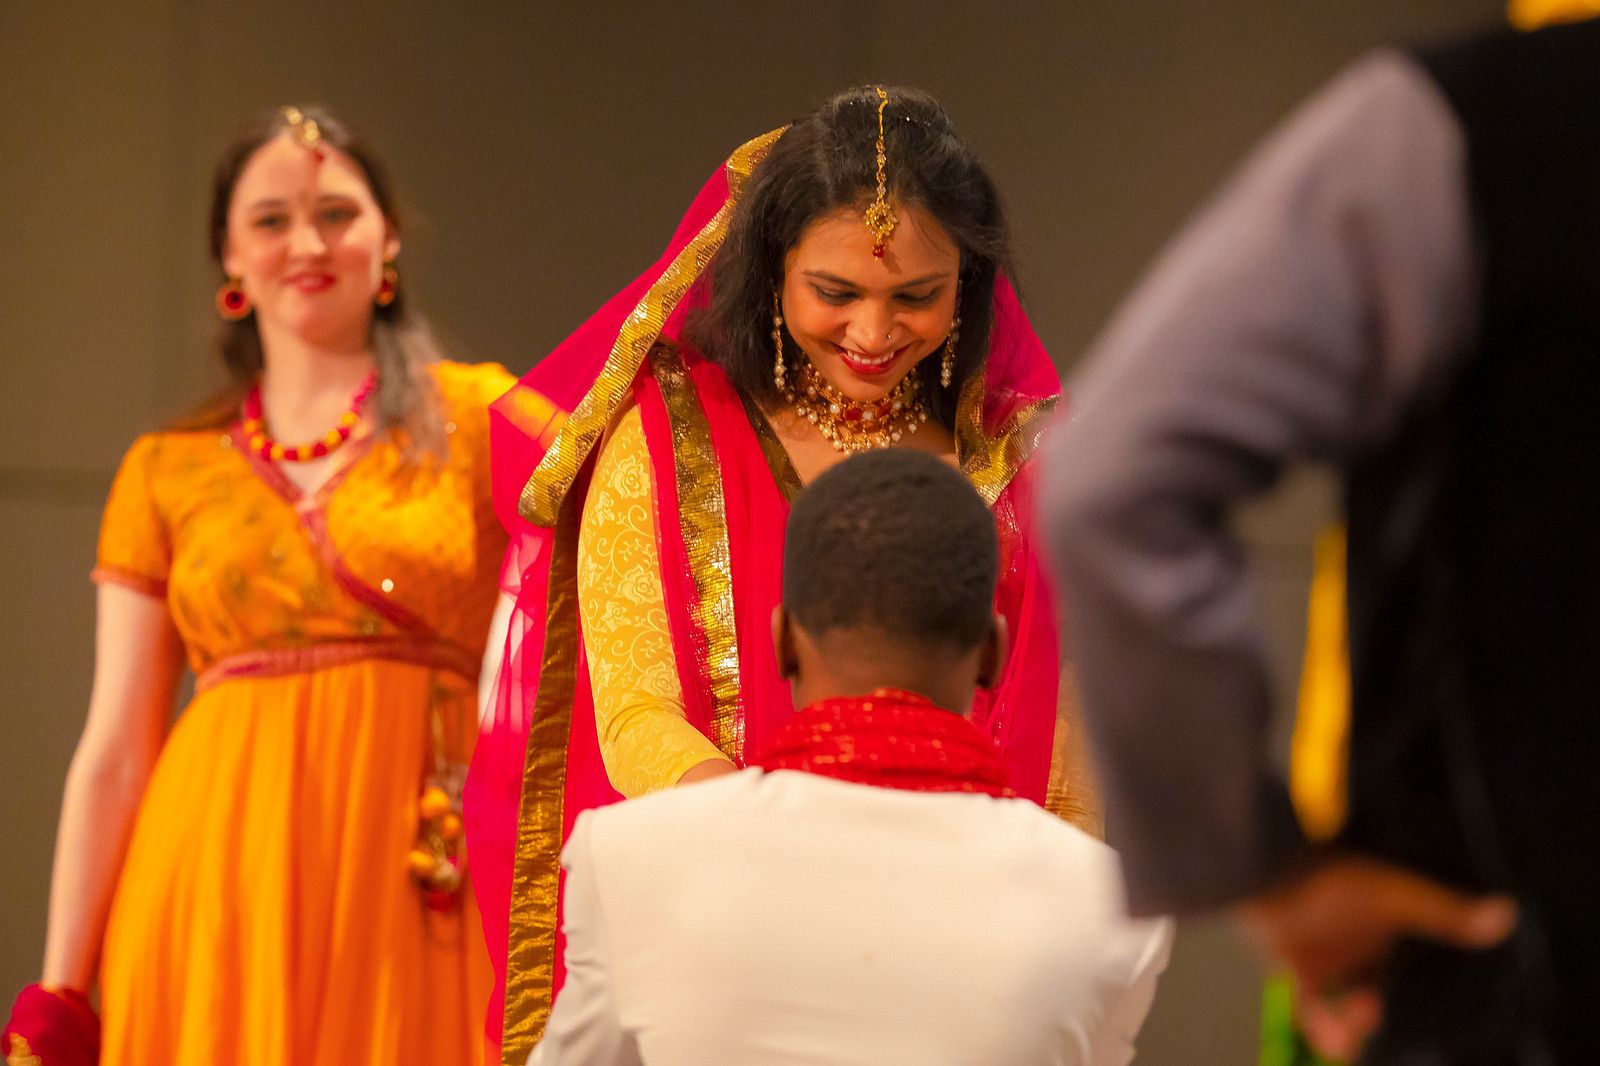 Re-enactment of an Indian marriage proposal